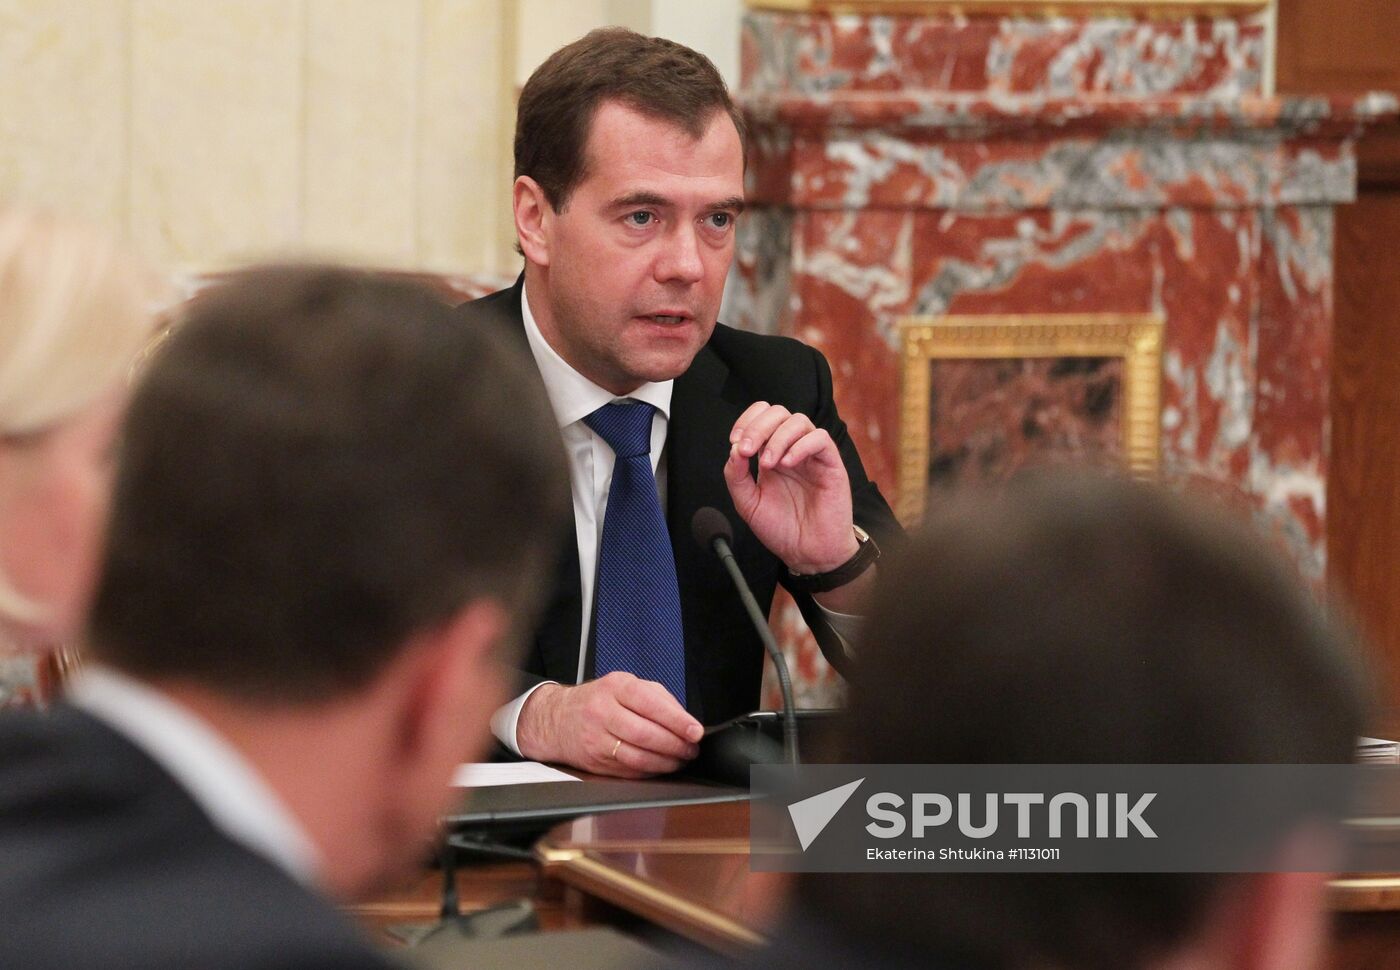 Dmitry Medvedev holds first government meeting on May 21, 2012